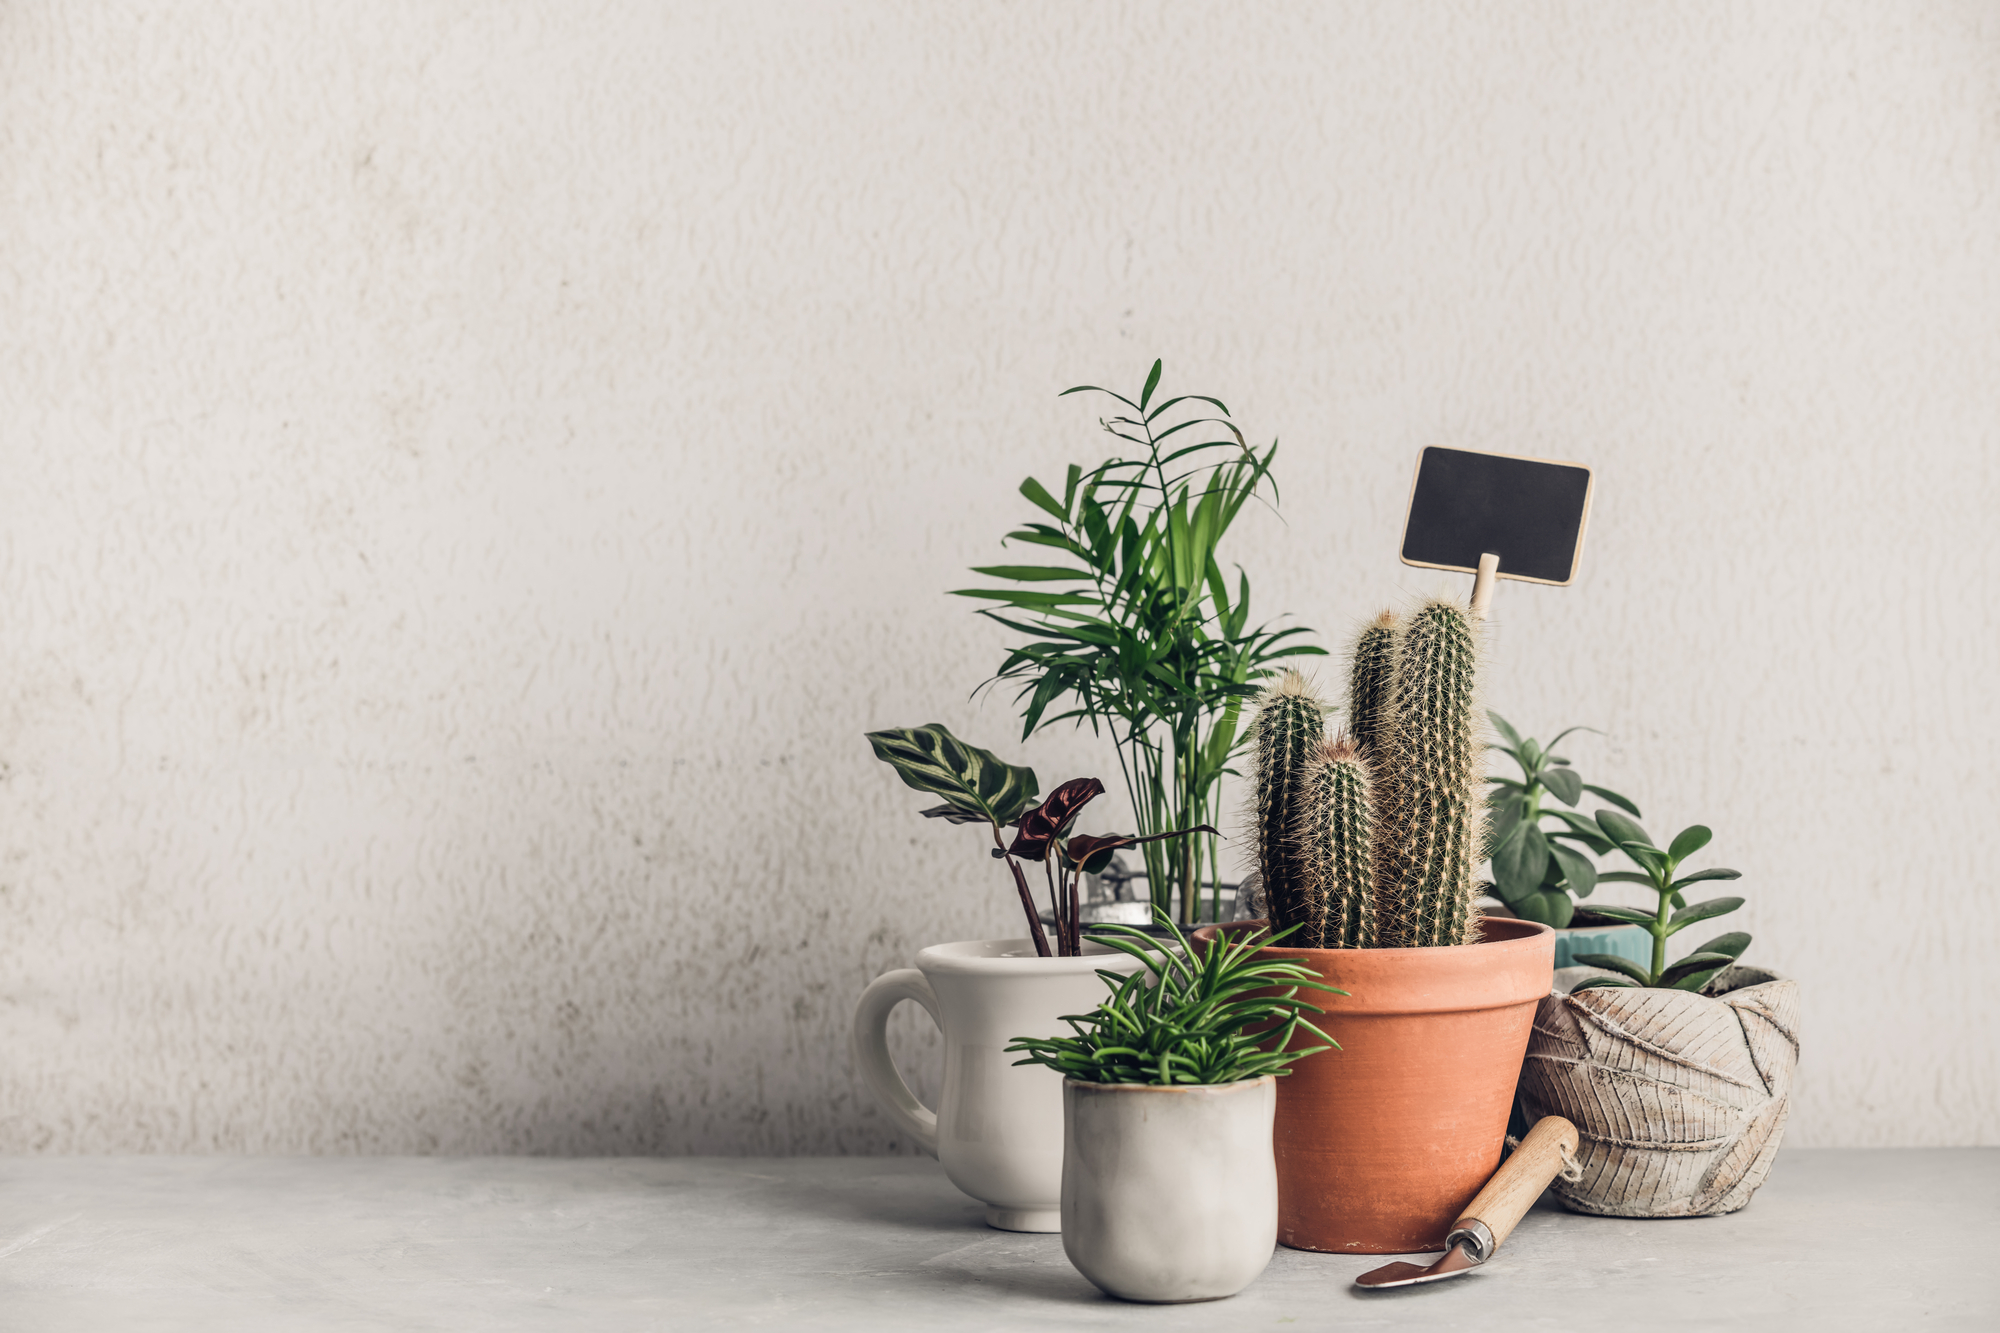 Collection of various cactus and succulent plants in different pots. Minimalistic Home decor and gardening concept. Stylish interior with a lot of plants